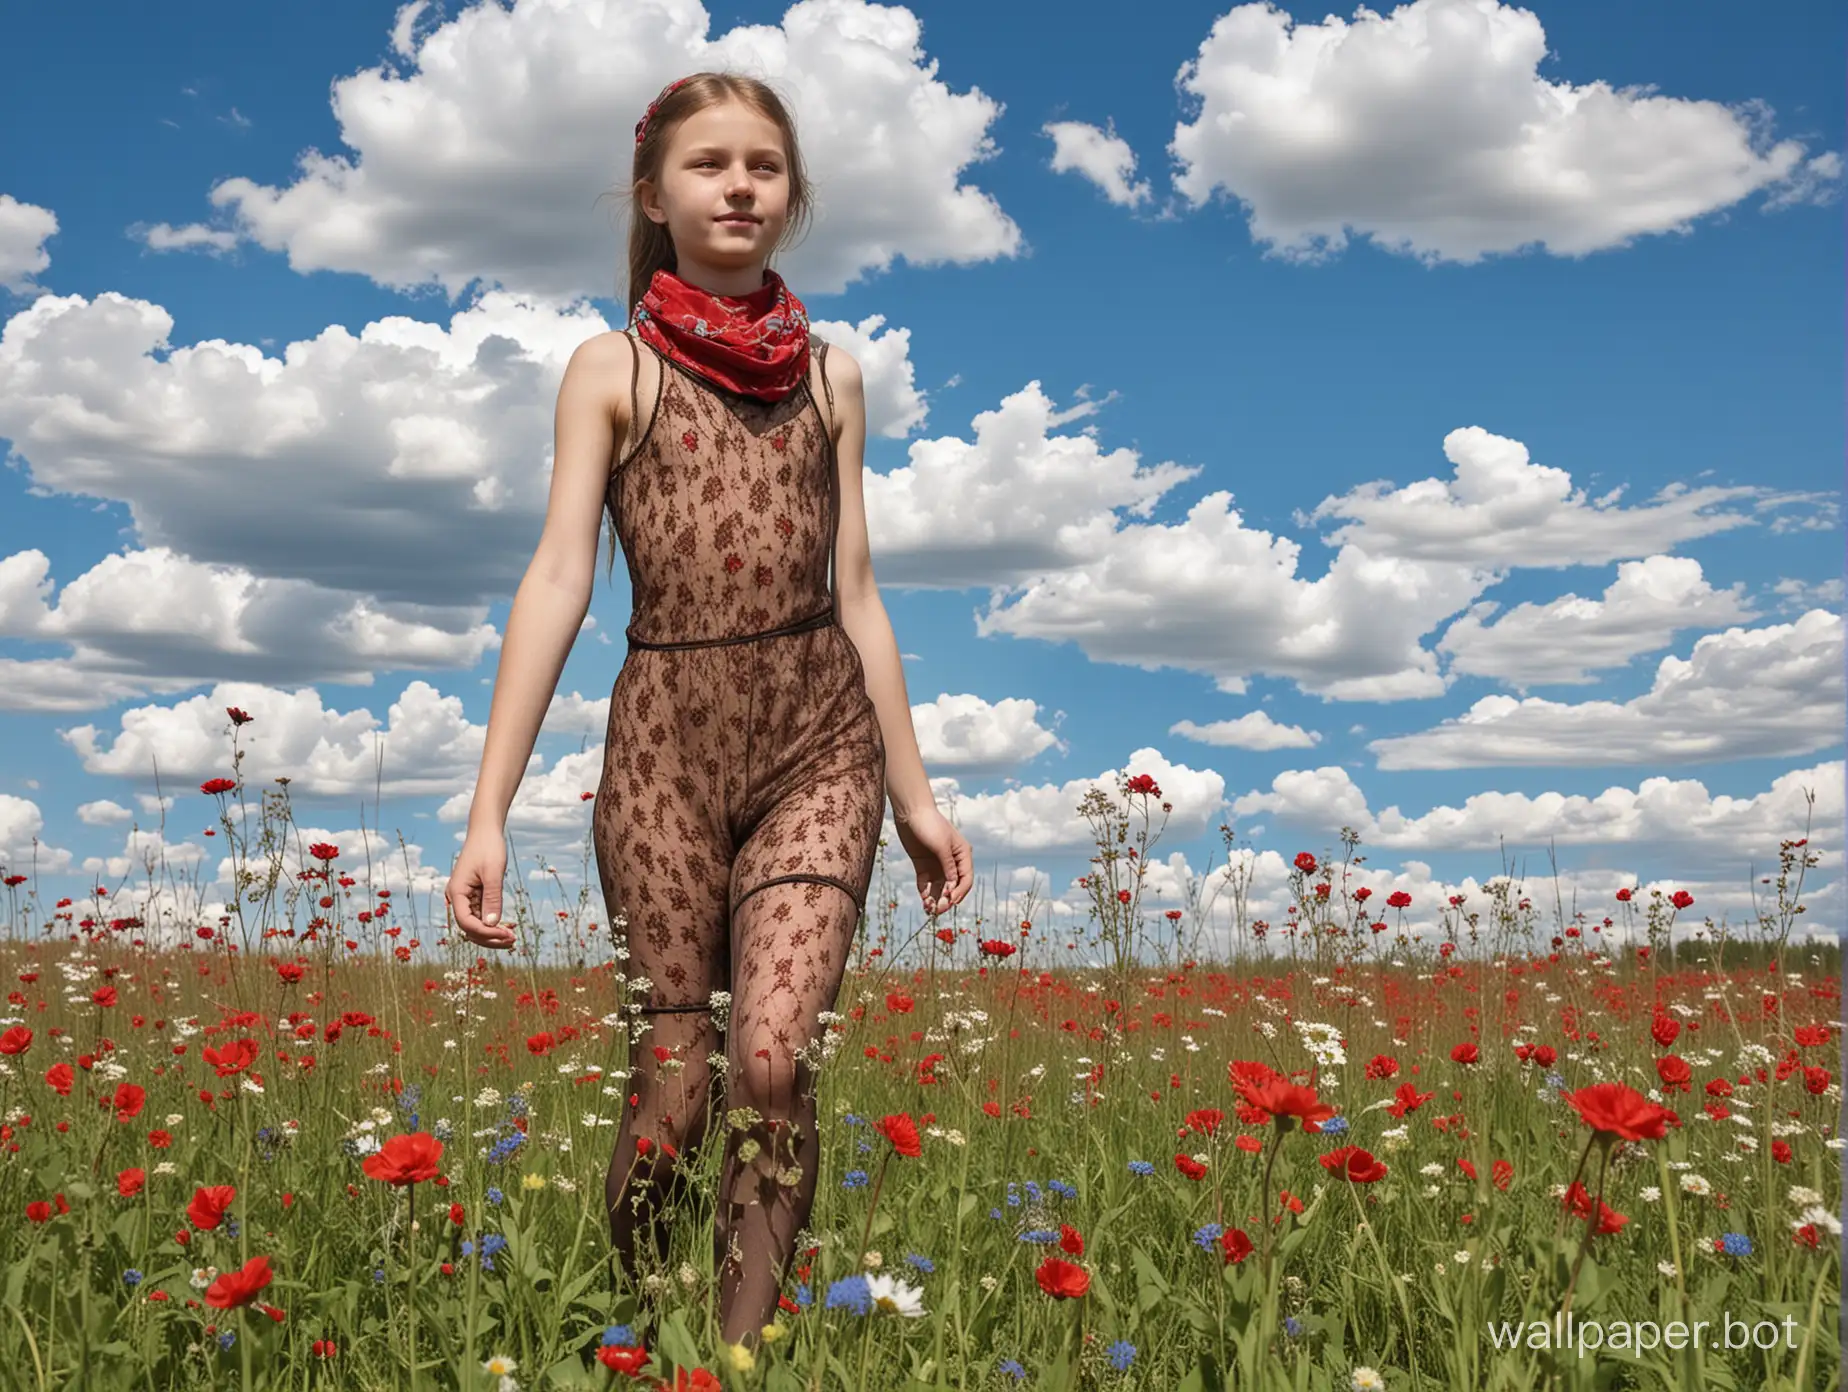 11YearOld-Soviet-Girl-in-Brown-Bodystocking-with-Red-Scarf-in-a-Blooming-Meadow